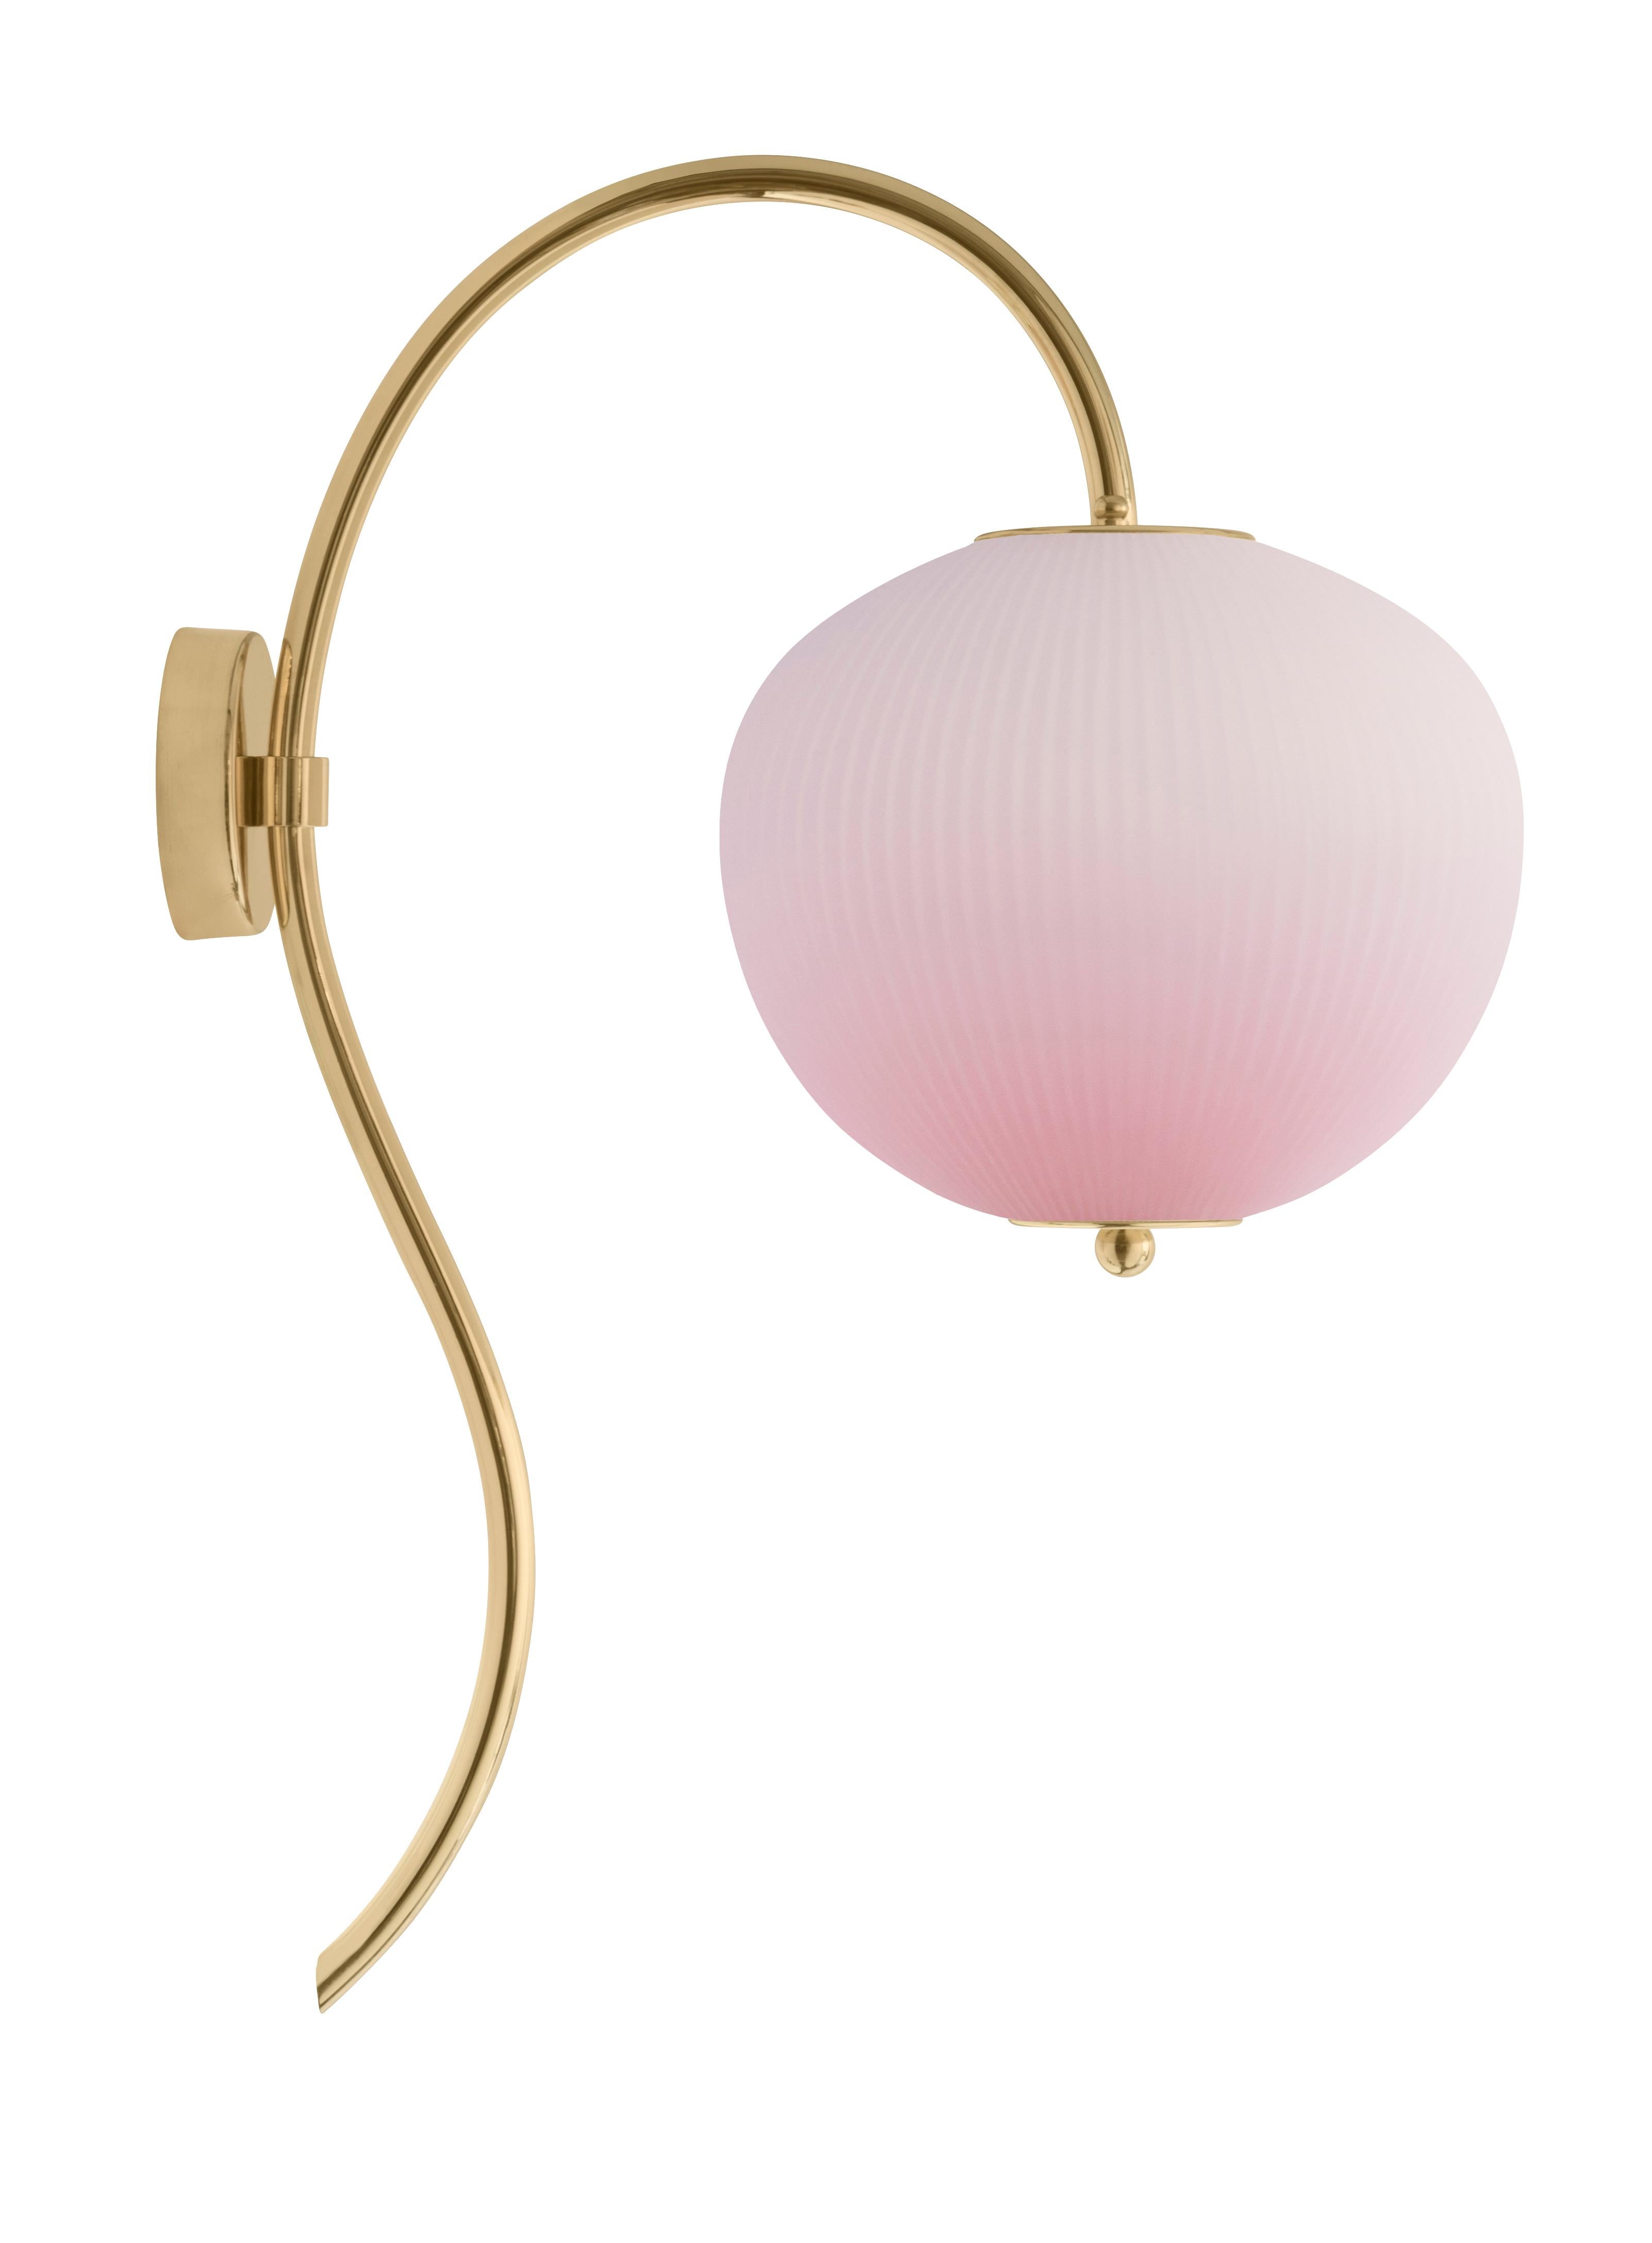 Wall lamp China 03 by Magic Circus Editions
Dimensions: H 62 x W 26.2 x D 41.5 cm
Materials: Brass, mouth blown glass sculpted with a diamond saw
Colour: soft rose

Available finishes: Brass, nickel
Available colours: enamel soft white, soft rose,